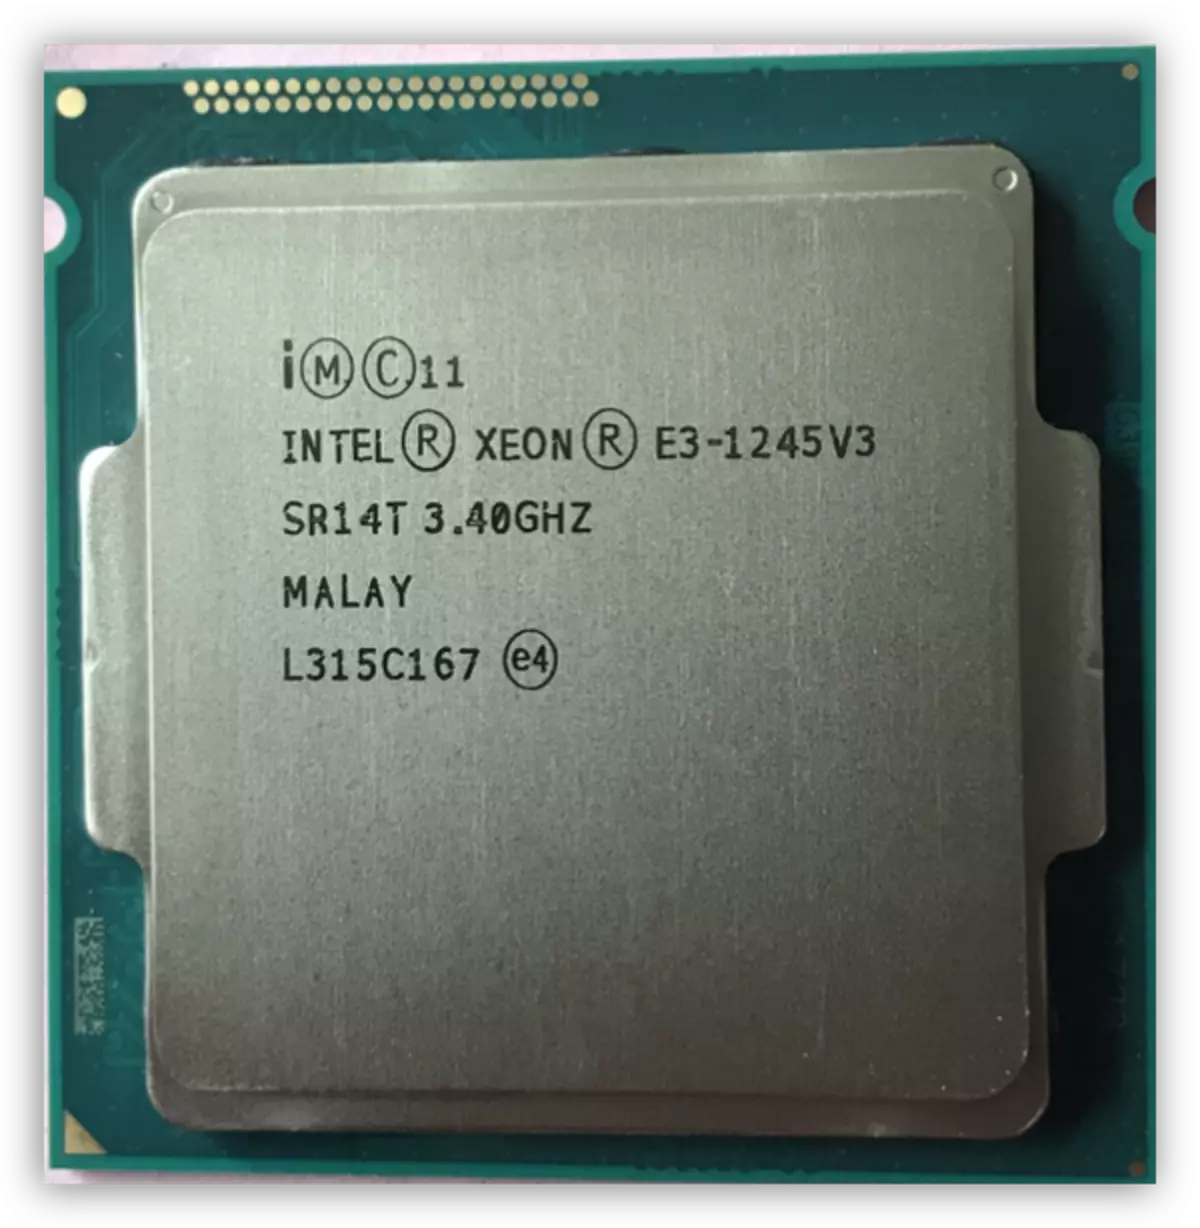 Xeon E3-1245 V3 isise on Haswell aryhitecture